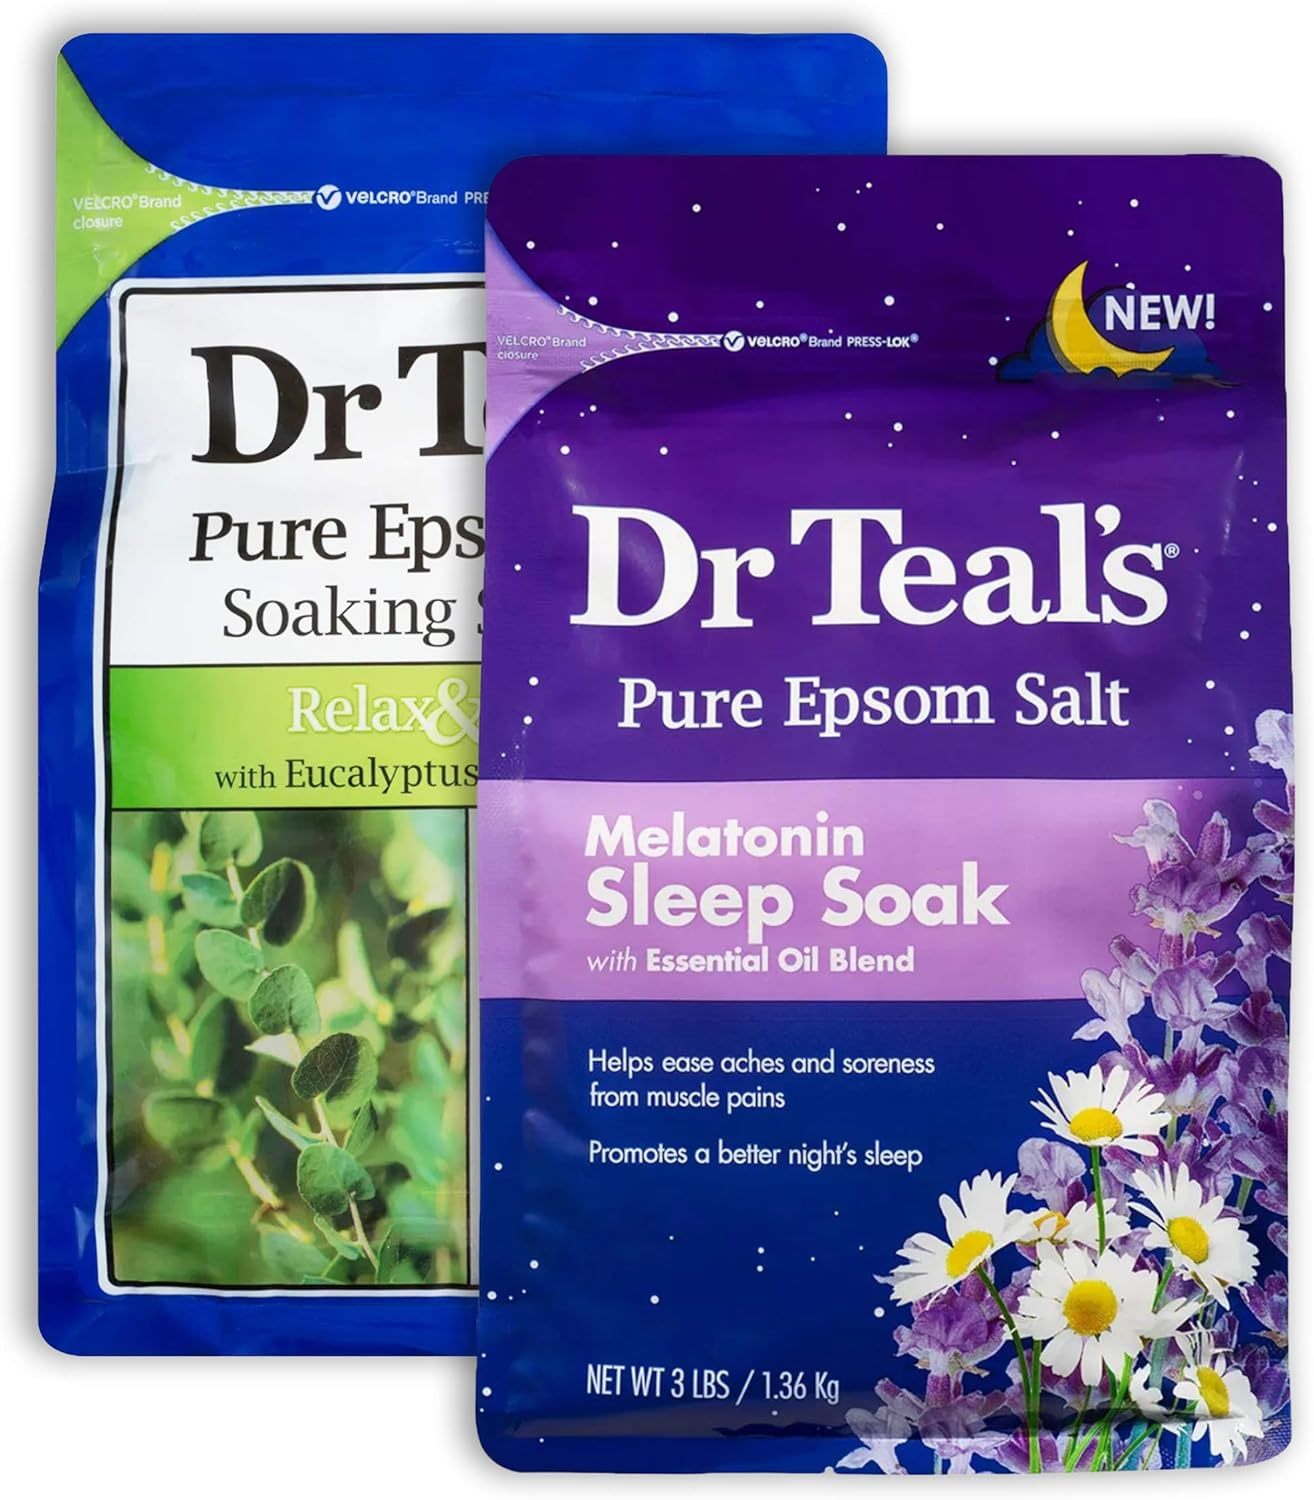 Dr Teal's Salt Bath Variety Gift Set (2 Pack, 3lbs Ea.) - Relax & Relief Eucalyp - $59.99